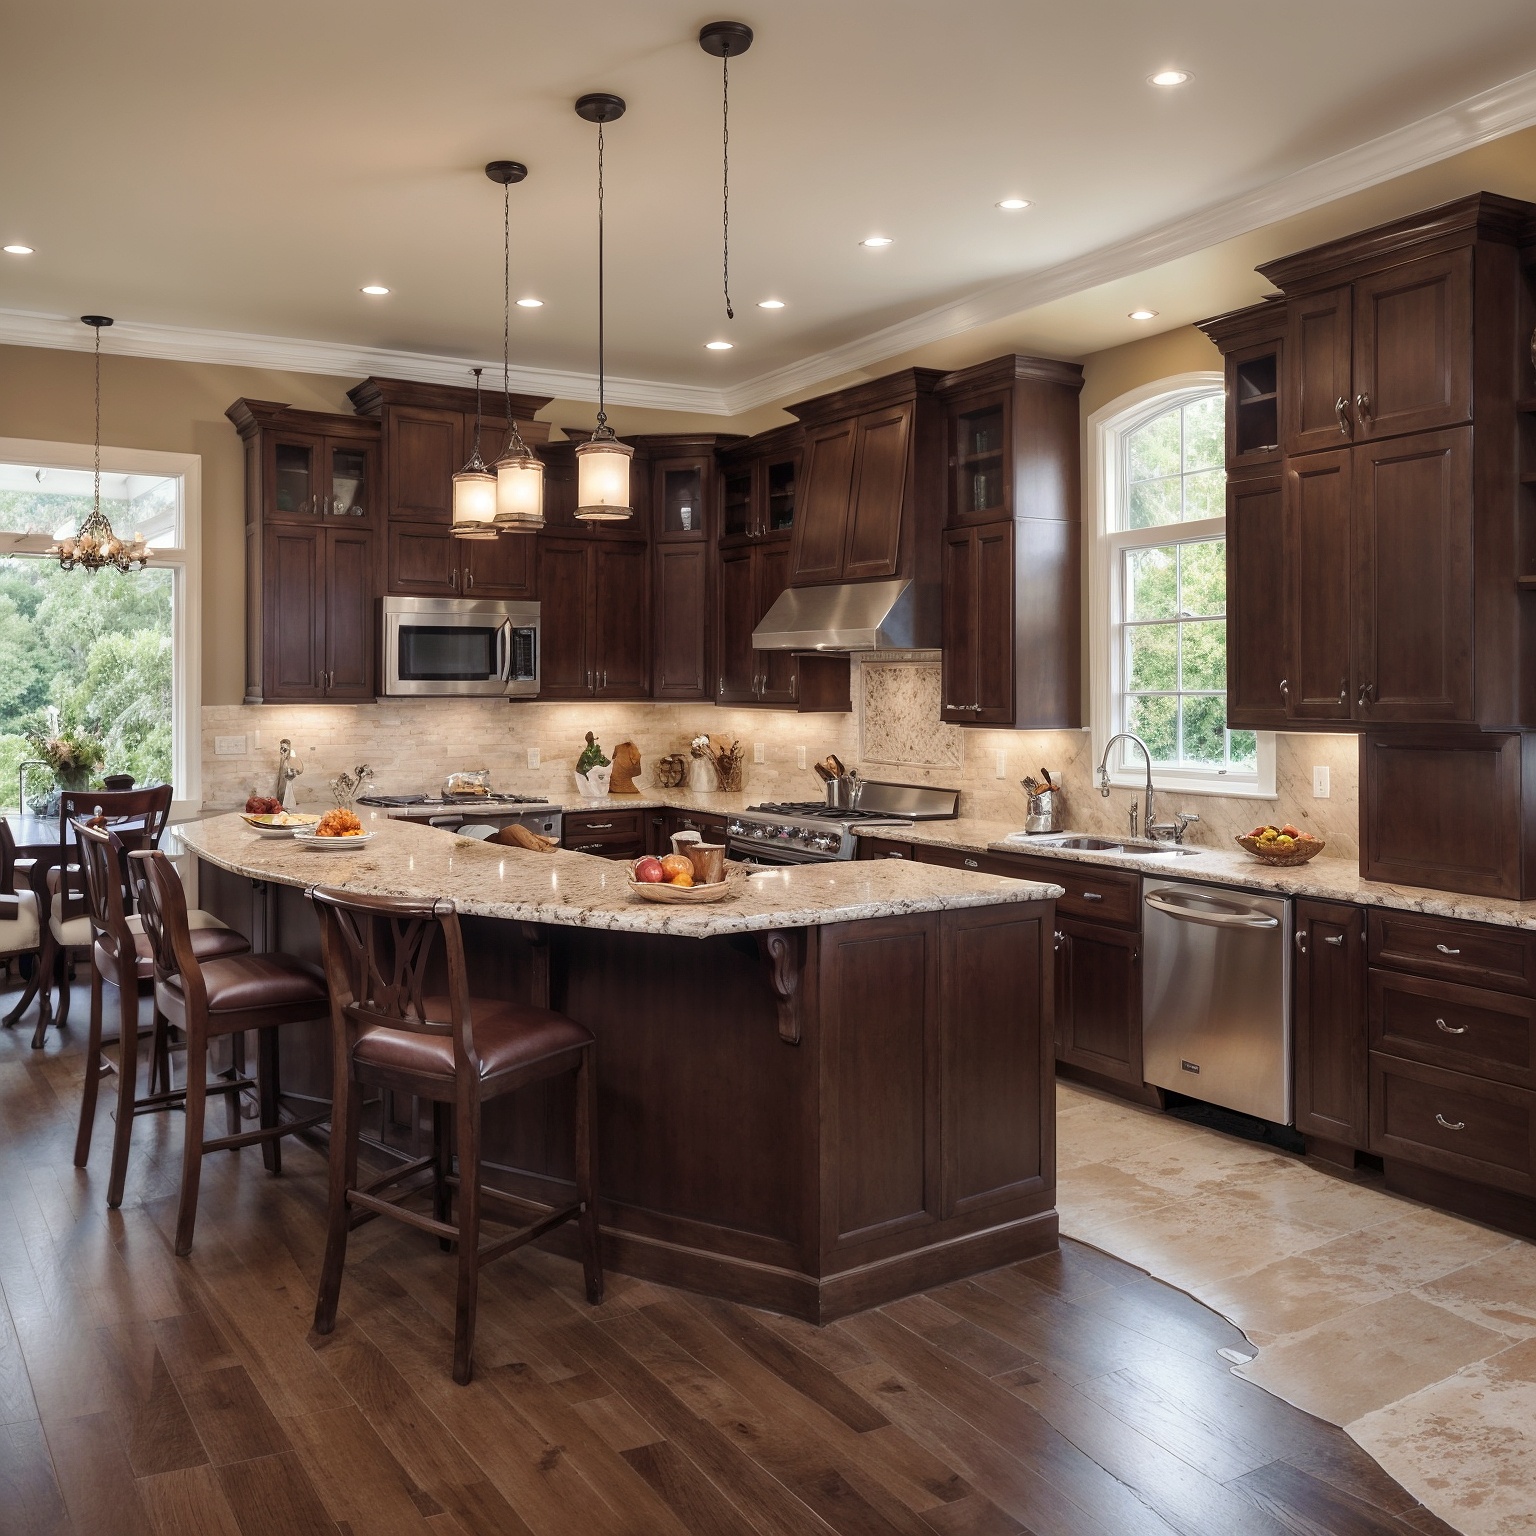 Traditional Kitchen Layout with Dark Wood Cabinetry, Granite Countertops, Peninsula with Breakfast Bar